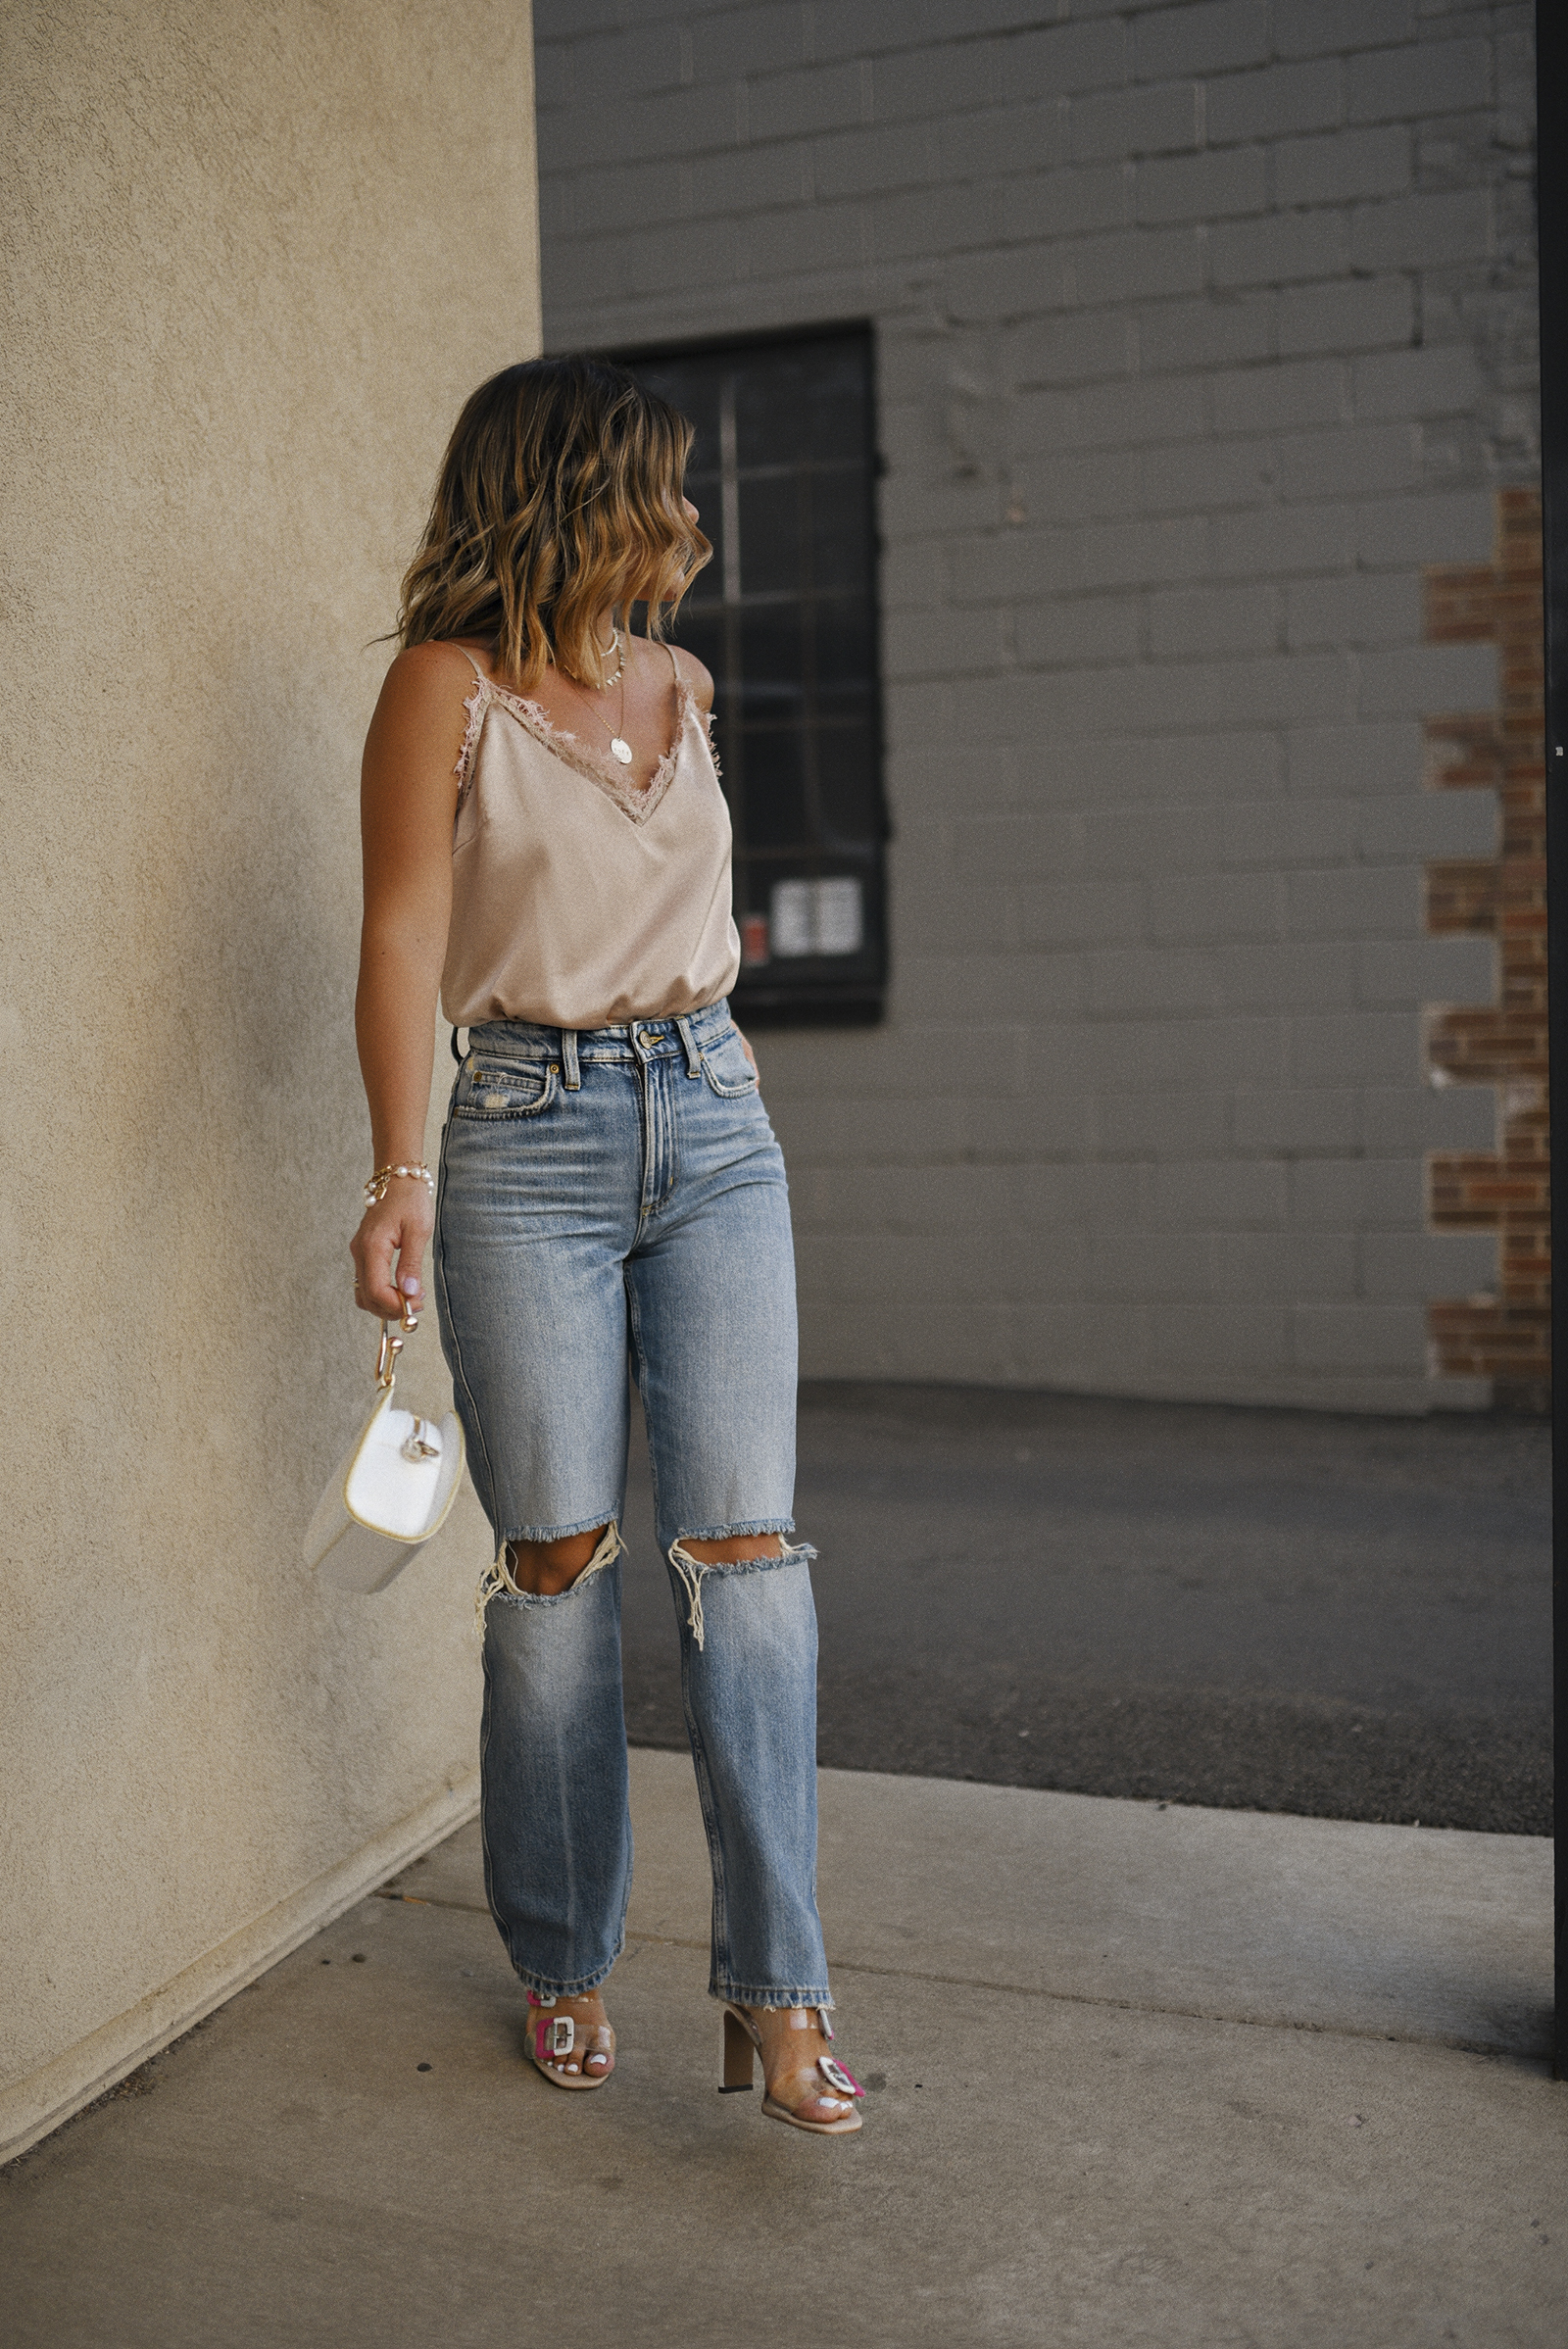 Discover 145+ jeans with heels outfit